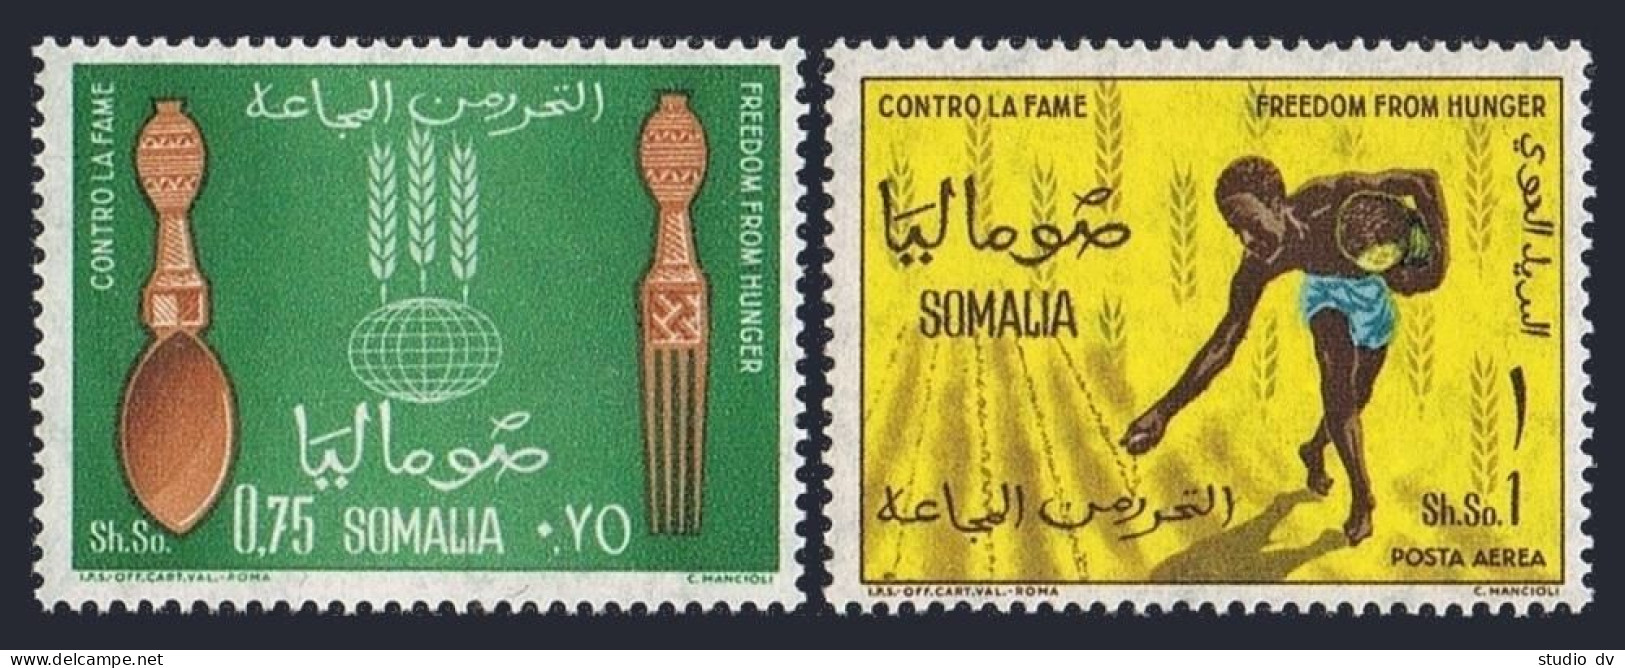 Somalia 269,C89, MNH. Michel 49-50. FAO Freedom From Hunger Campaign 1963. - Somalie (1960-...)